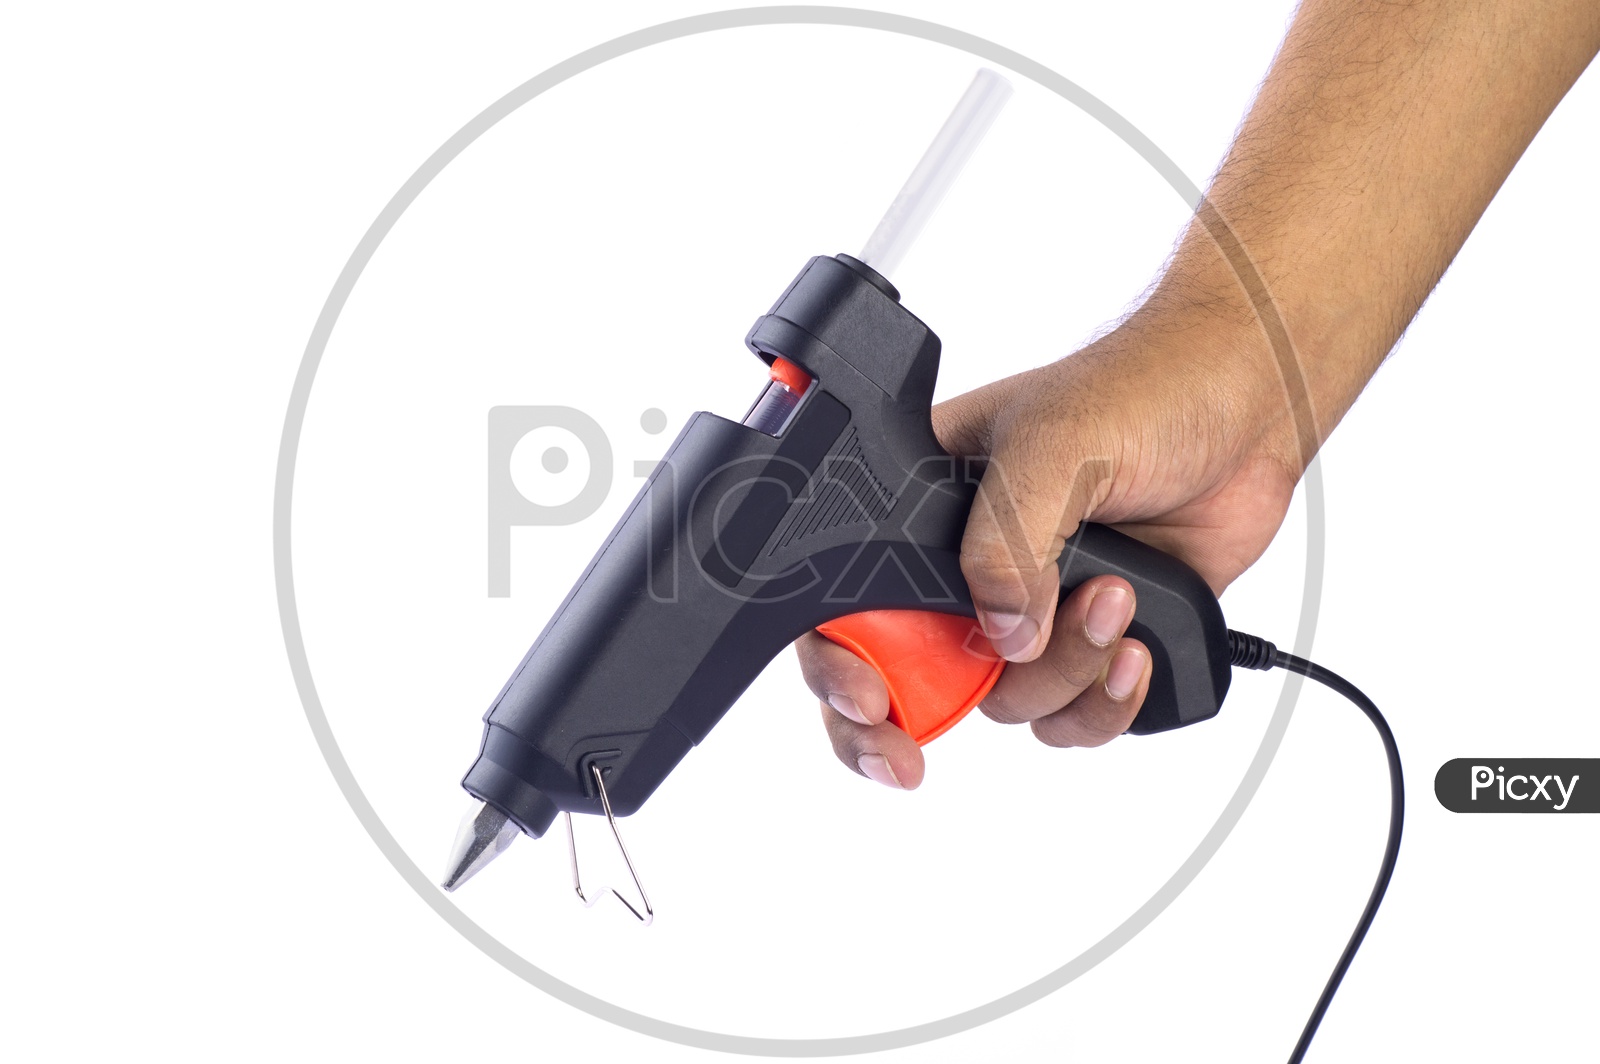 A Man Holding a Hot Glue Gun In Hand Over a White Isolated Background